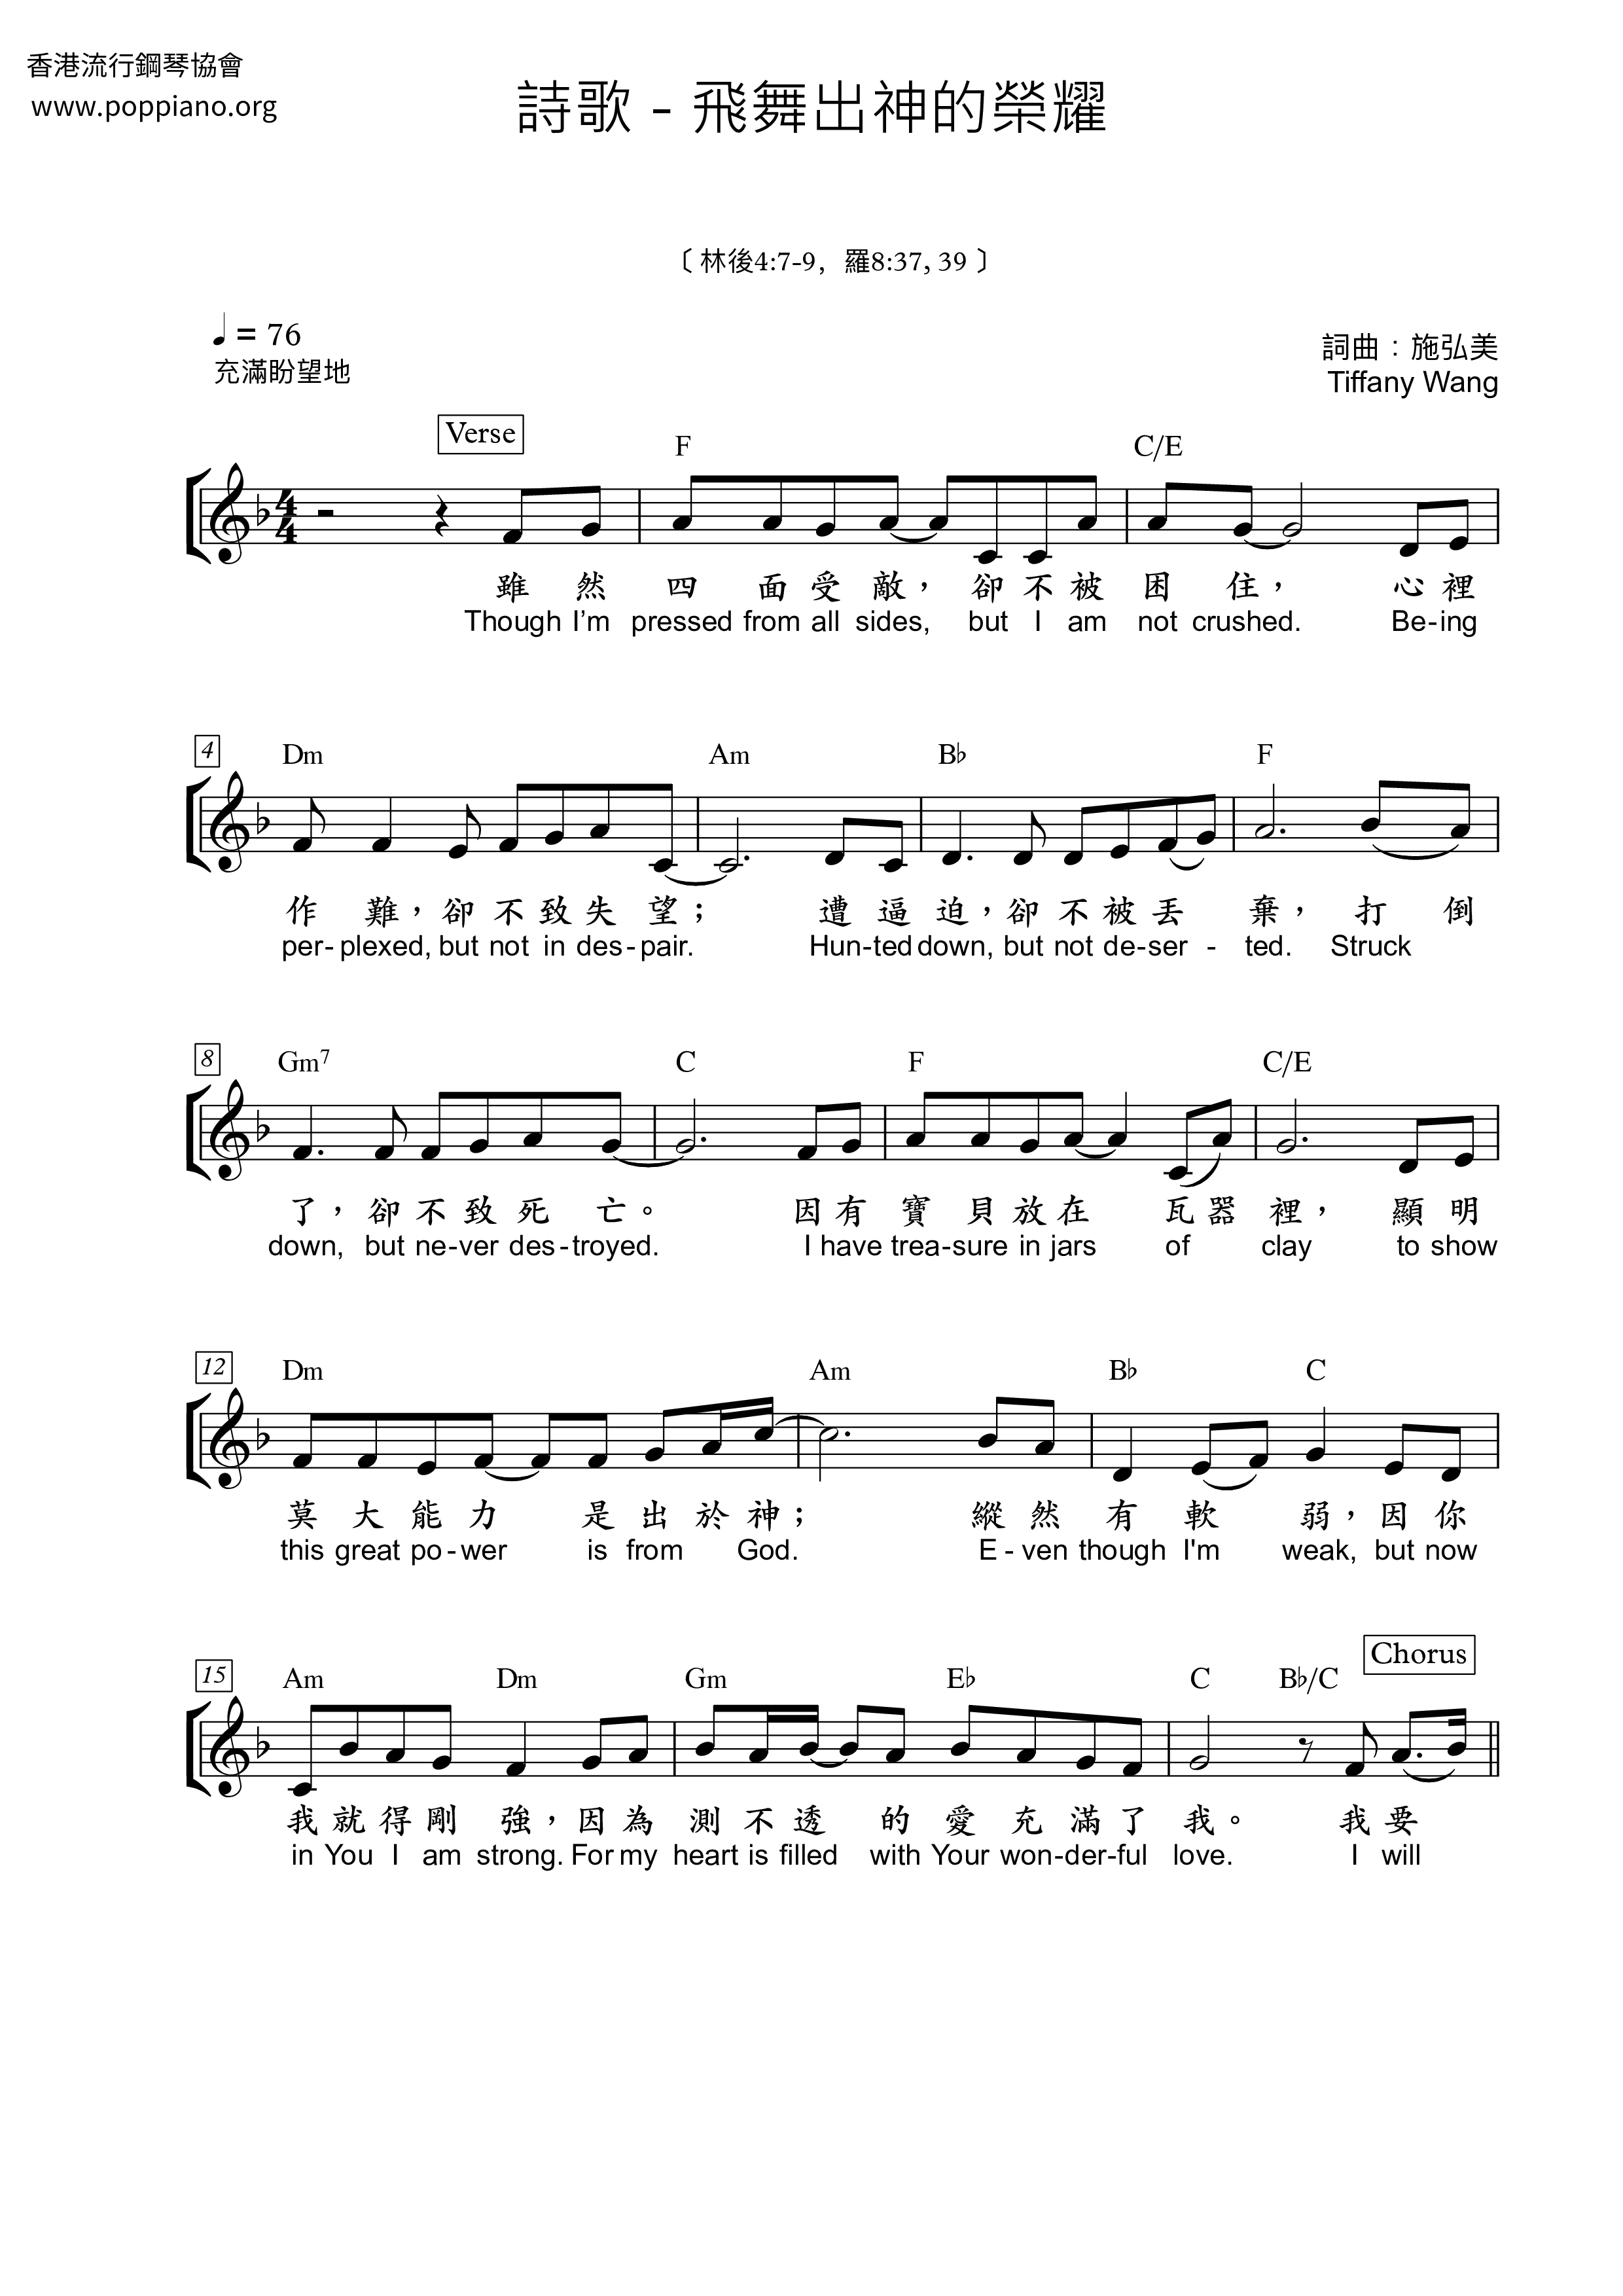 Dancing In The Glory Of God Score